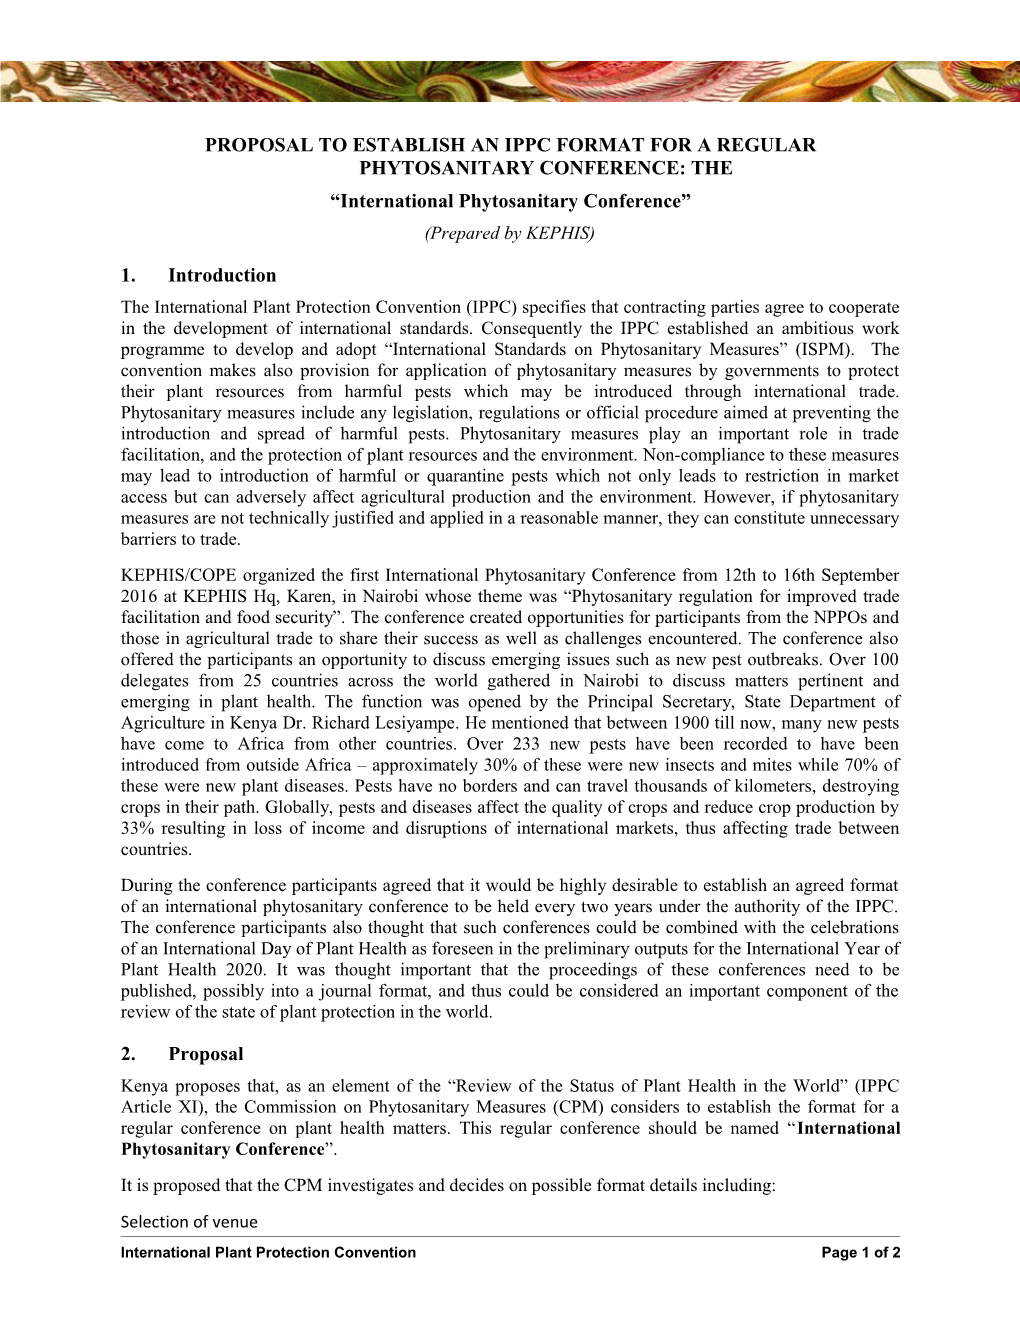 Proposal to Establish an IPPC Format for a Regular Phytosanitary Conference: The